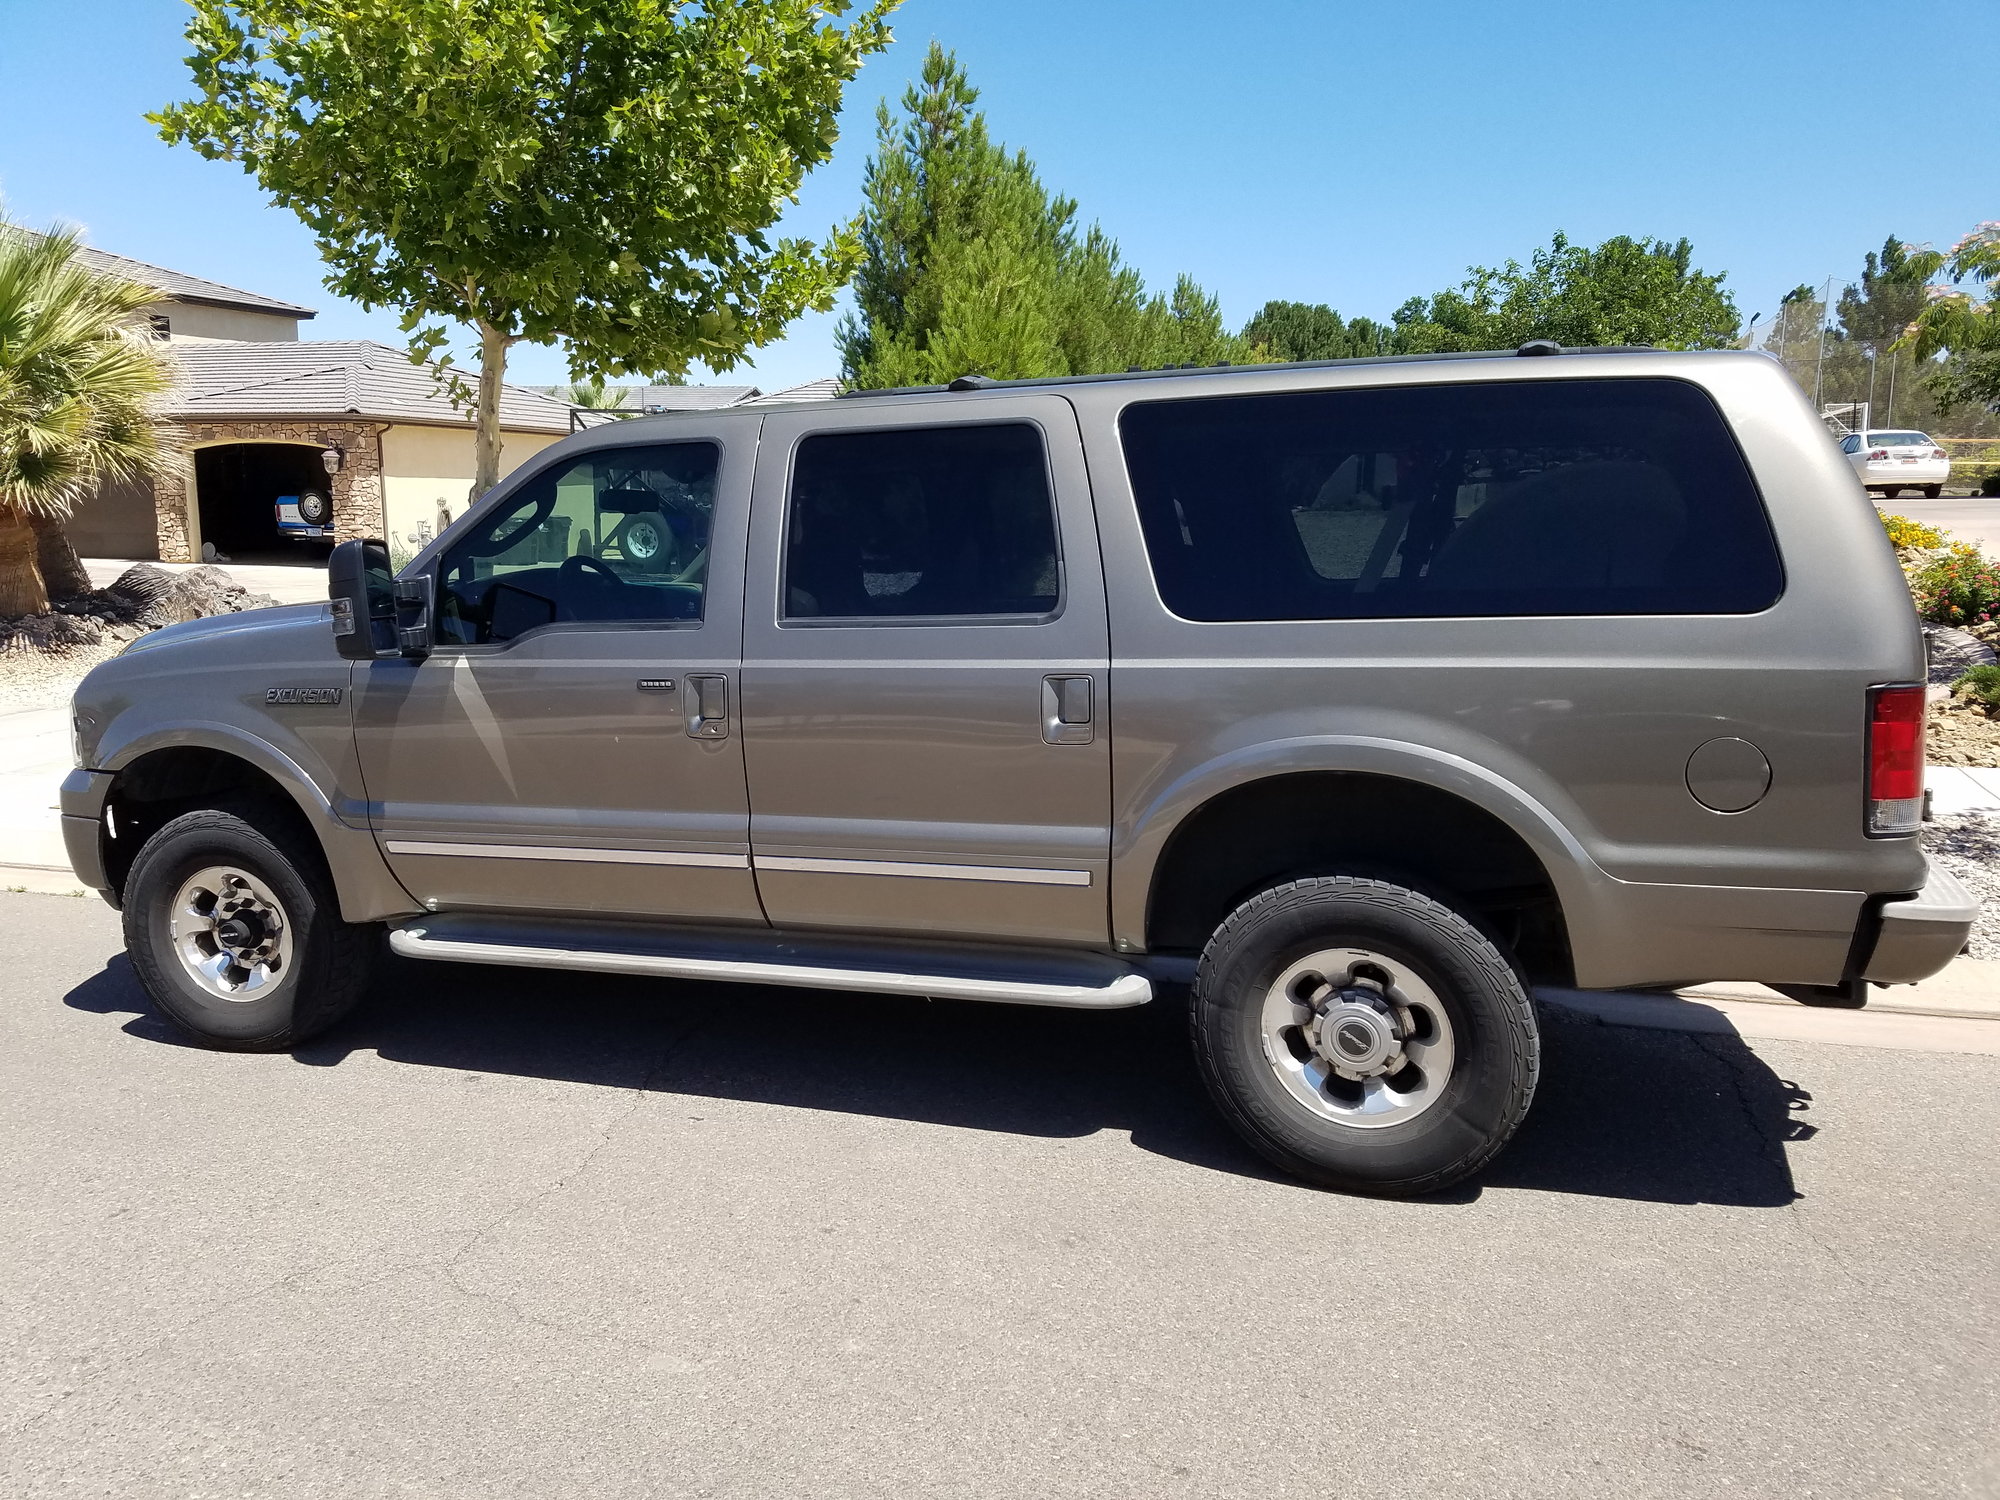 2005 Ford Excursion 6.0 Diesel Reliability